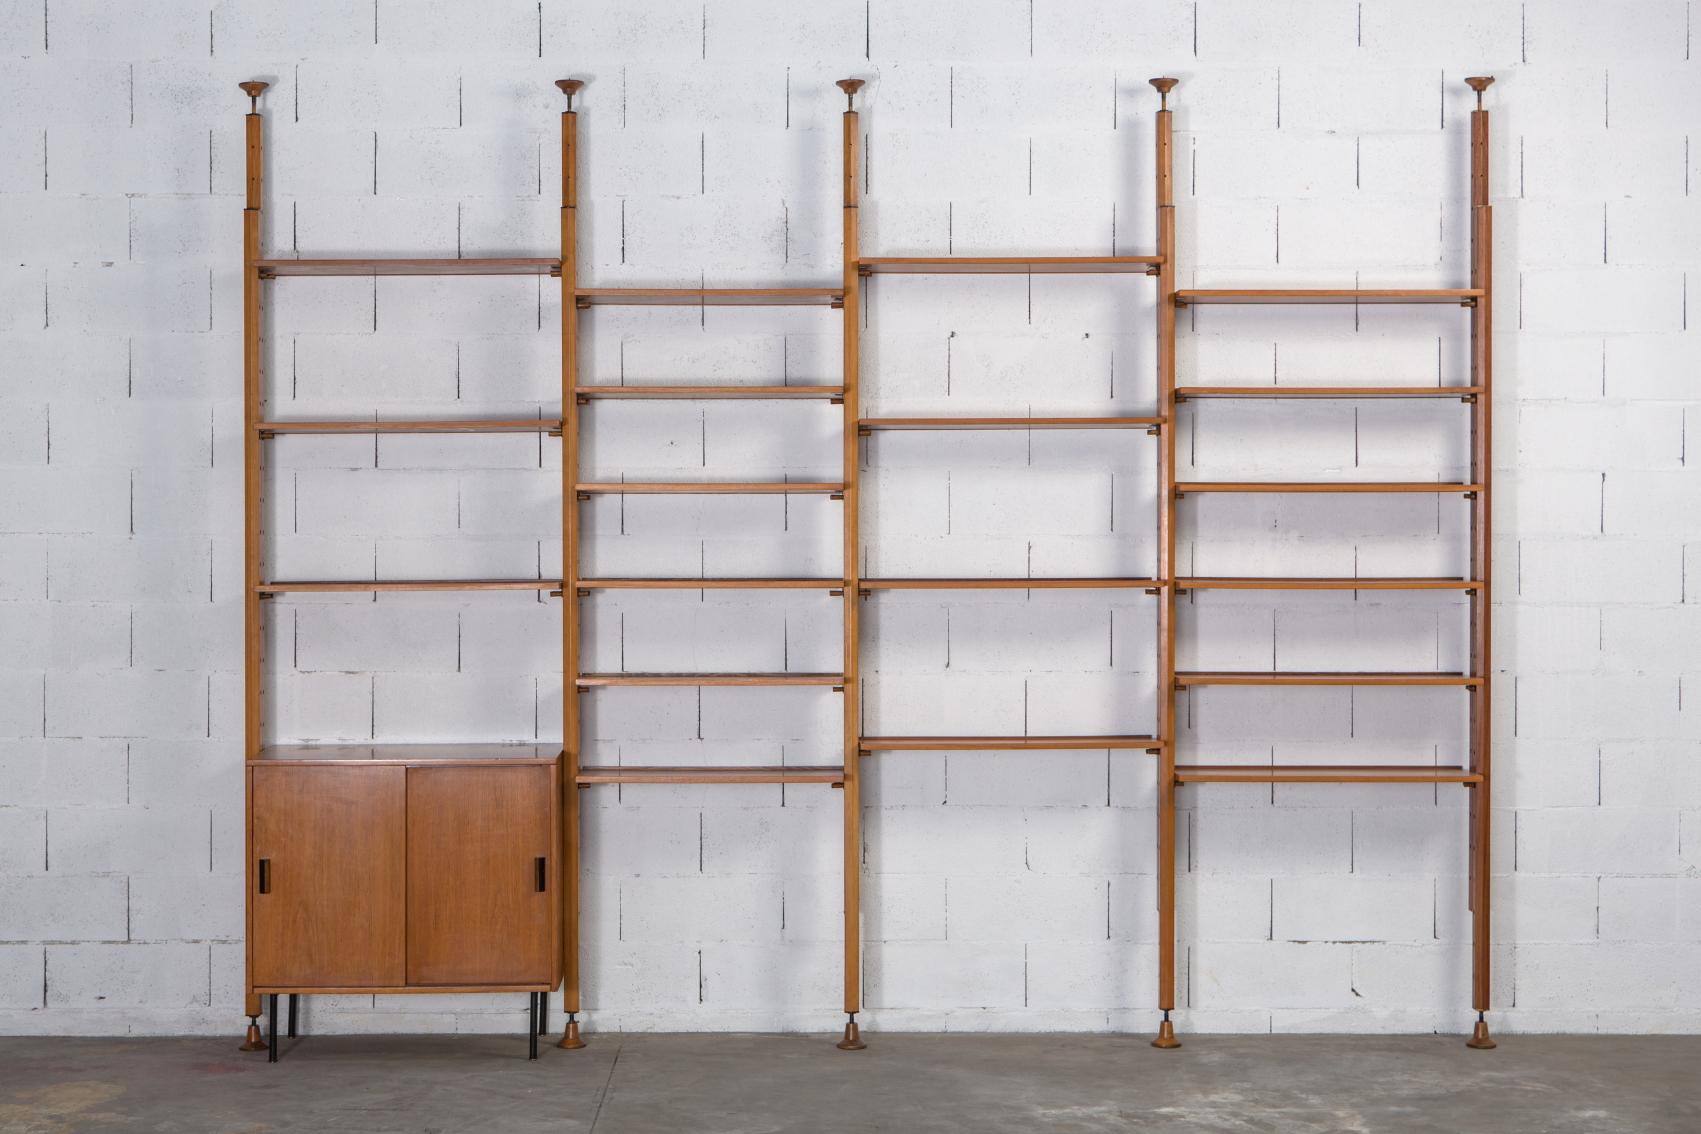 A stunning, rare and substantial bookcase/wall unit – including the original cabinet section – designed by Leonardo Fiori for I.S.A. Bergamo in the 1950s. Comprises 19 shelves and 5 adjustable upright sections. With makers mark and in wonderful